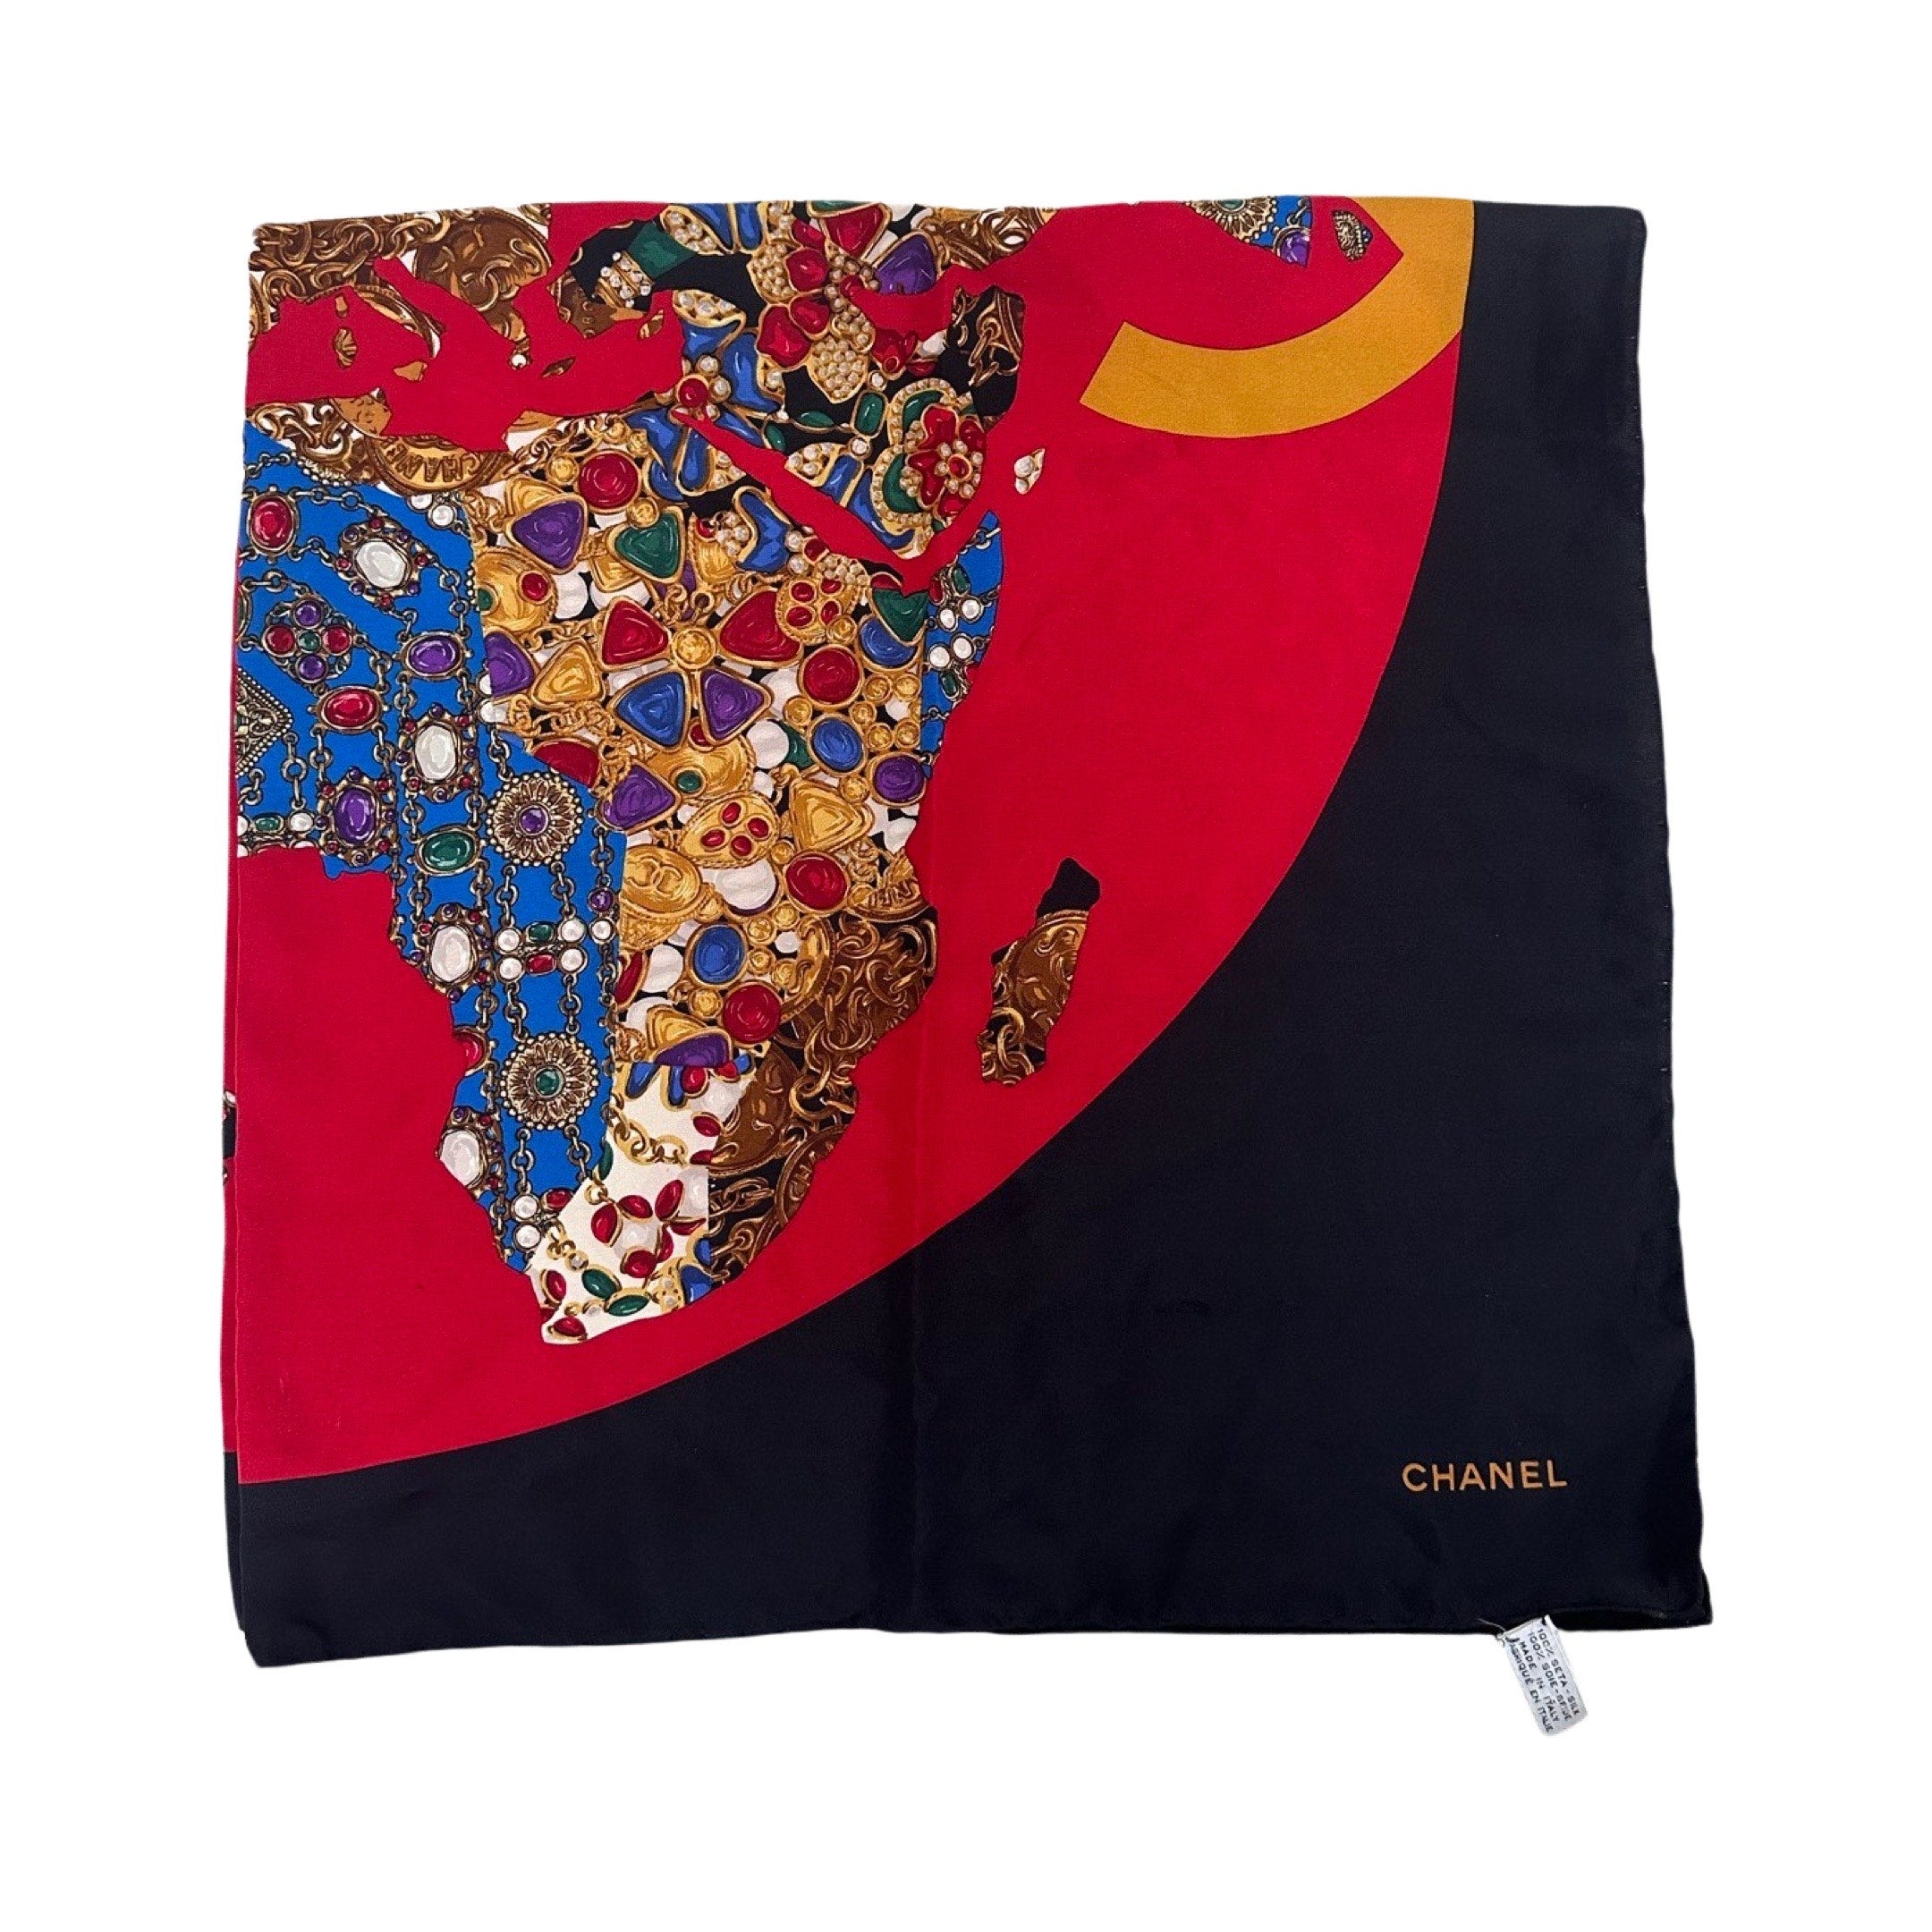 WORLD'S FINEST COLLECTION OF VINTAGE LOUIS VUITTON SILK SCARVES